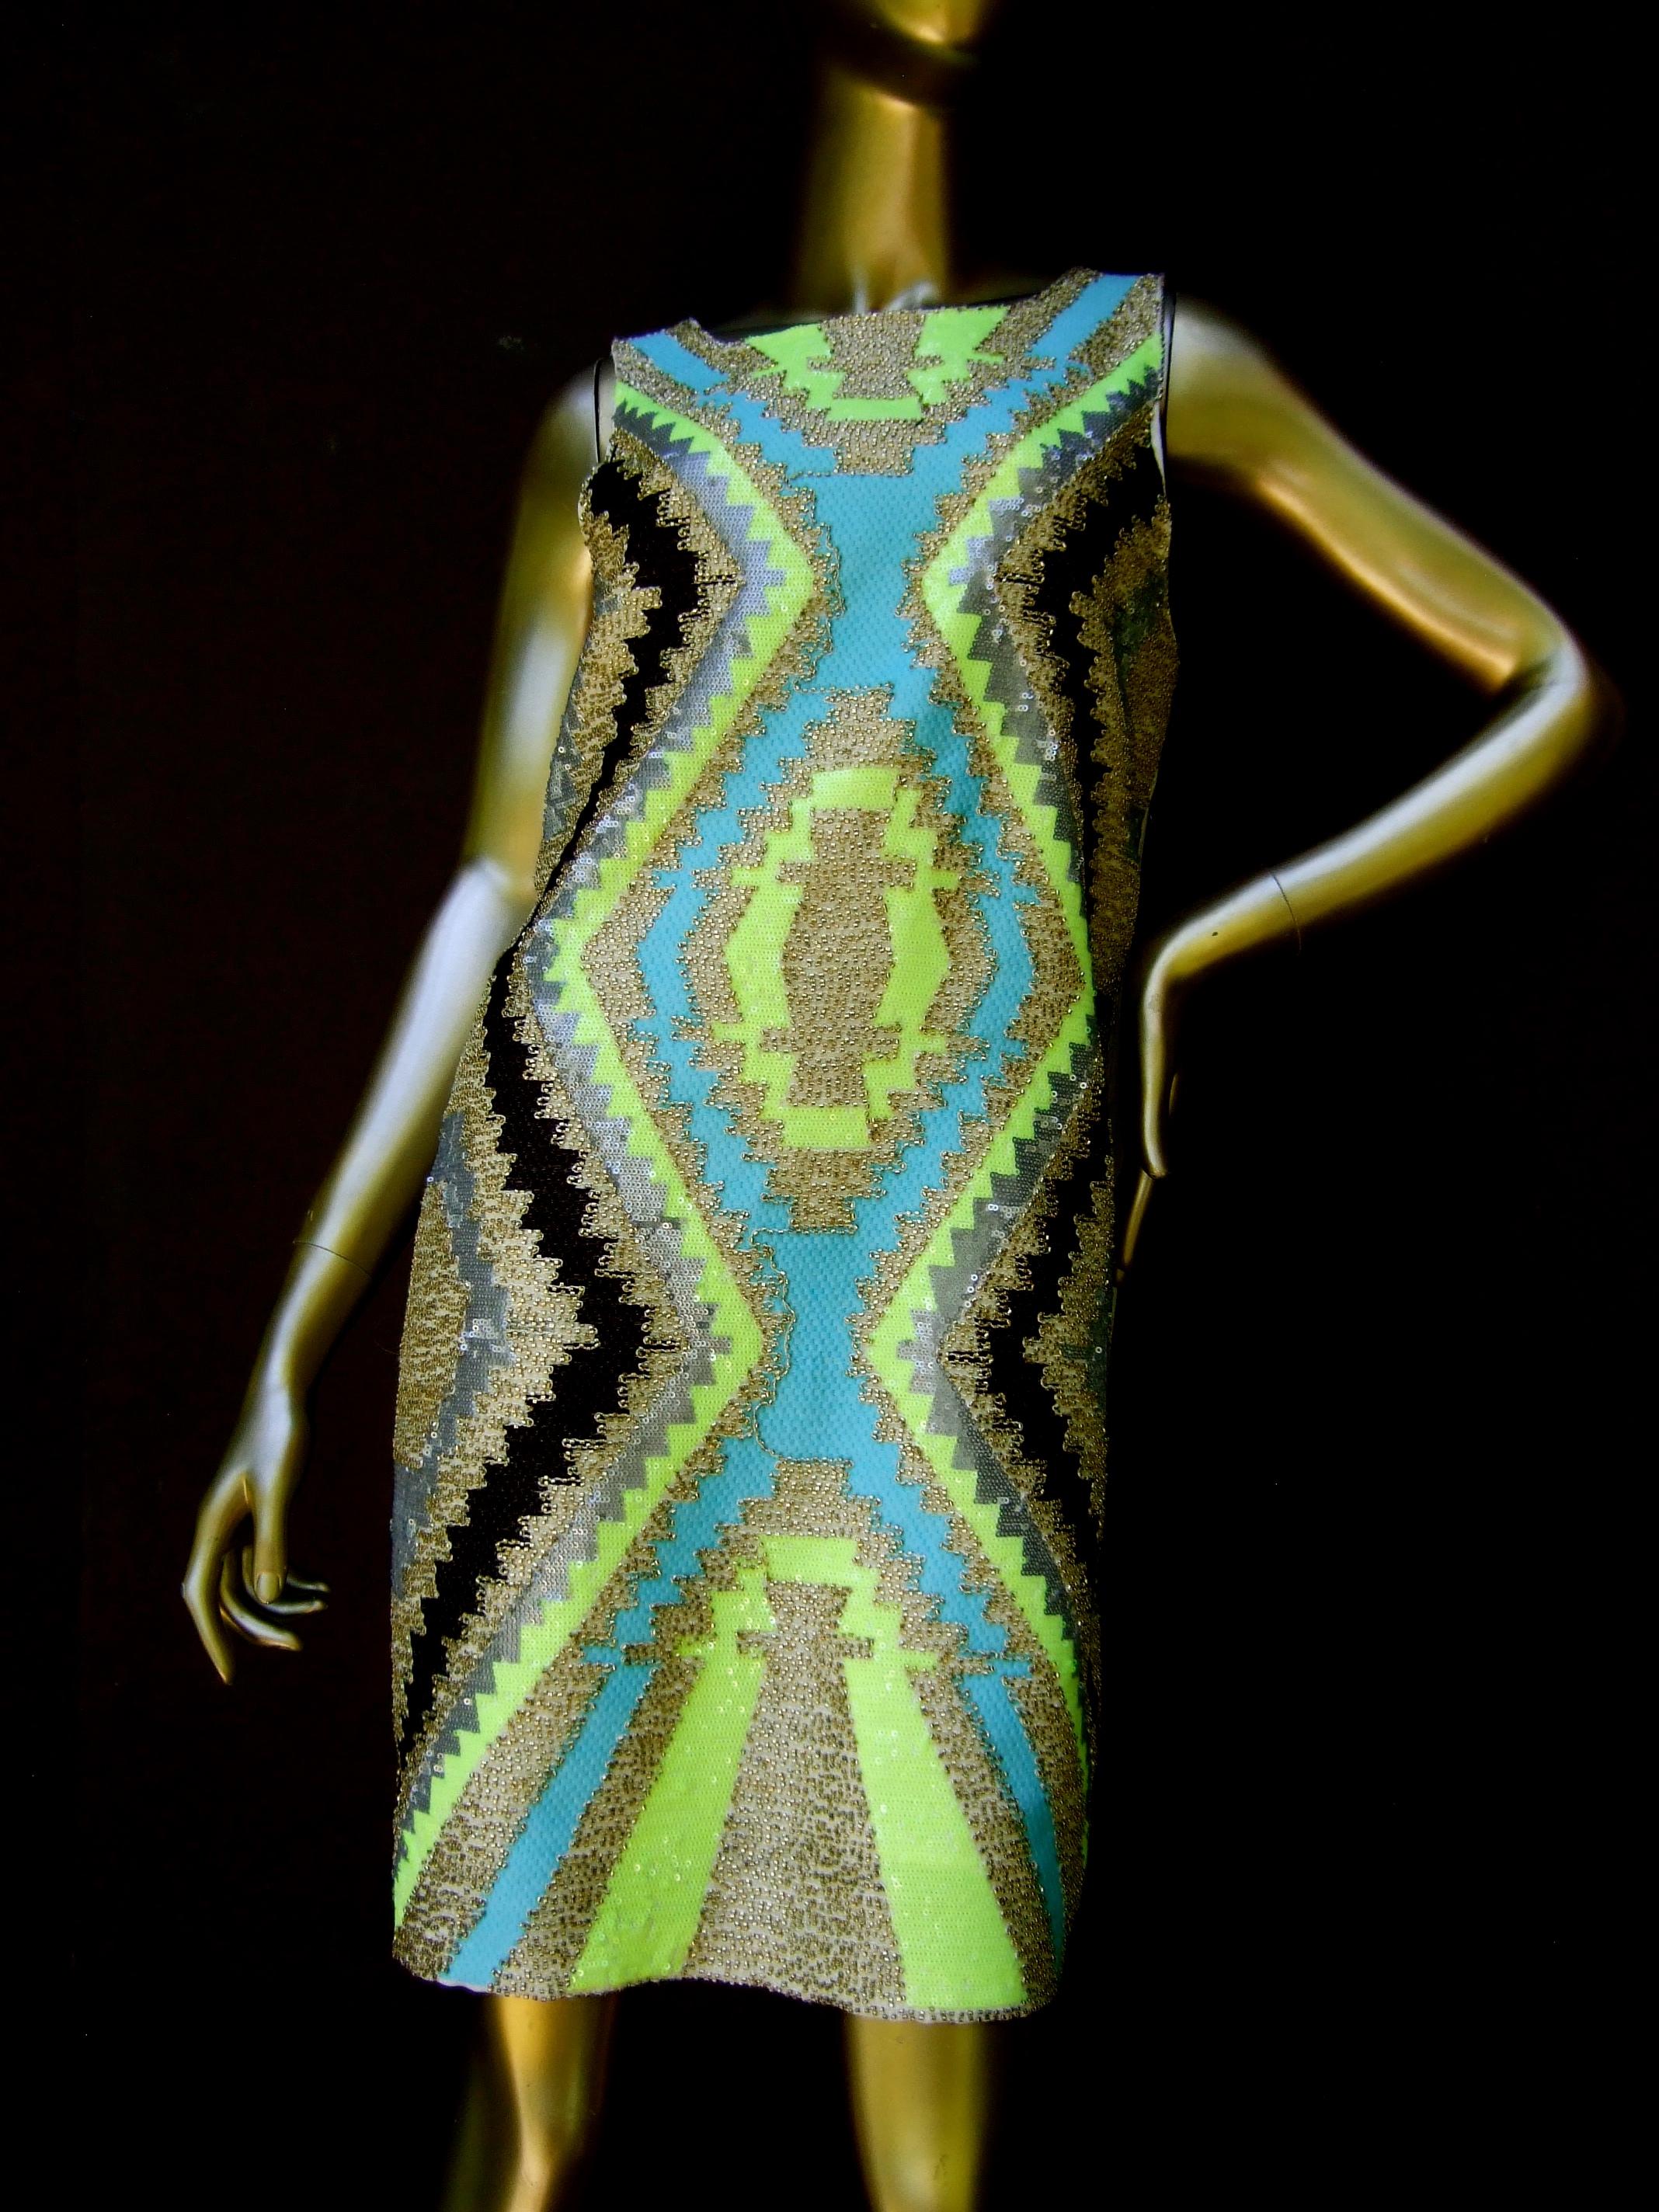  Mod bold beaded & sequinned sleeveless geometric chevron sheath dress designed by Harper 
The stylish loose boxy sac style sheath is designed with a mosaic of gold bugle beads;
combined with silvery gray & lime green small size sequins. Juxtaposed